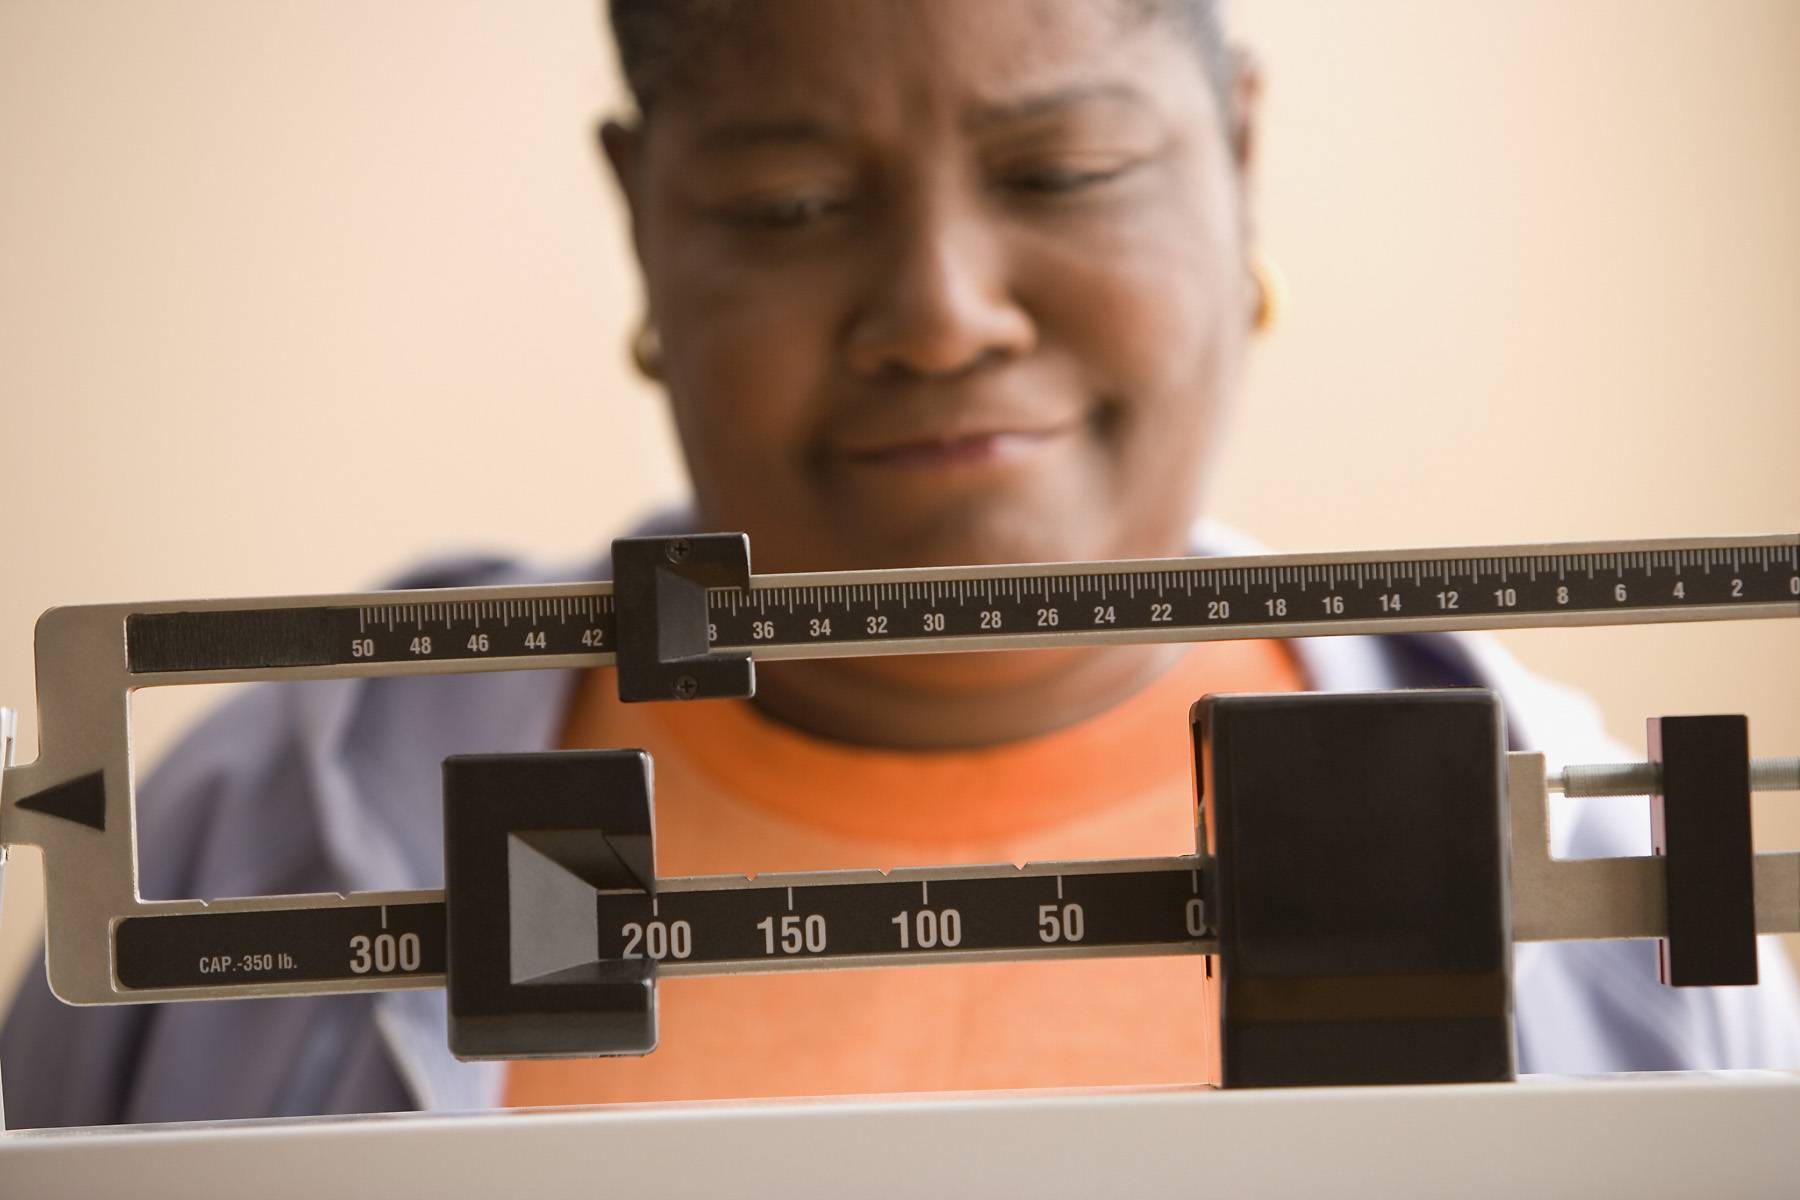 Obese Women of Color Have Heightened Risk for Breast Cancer